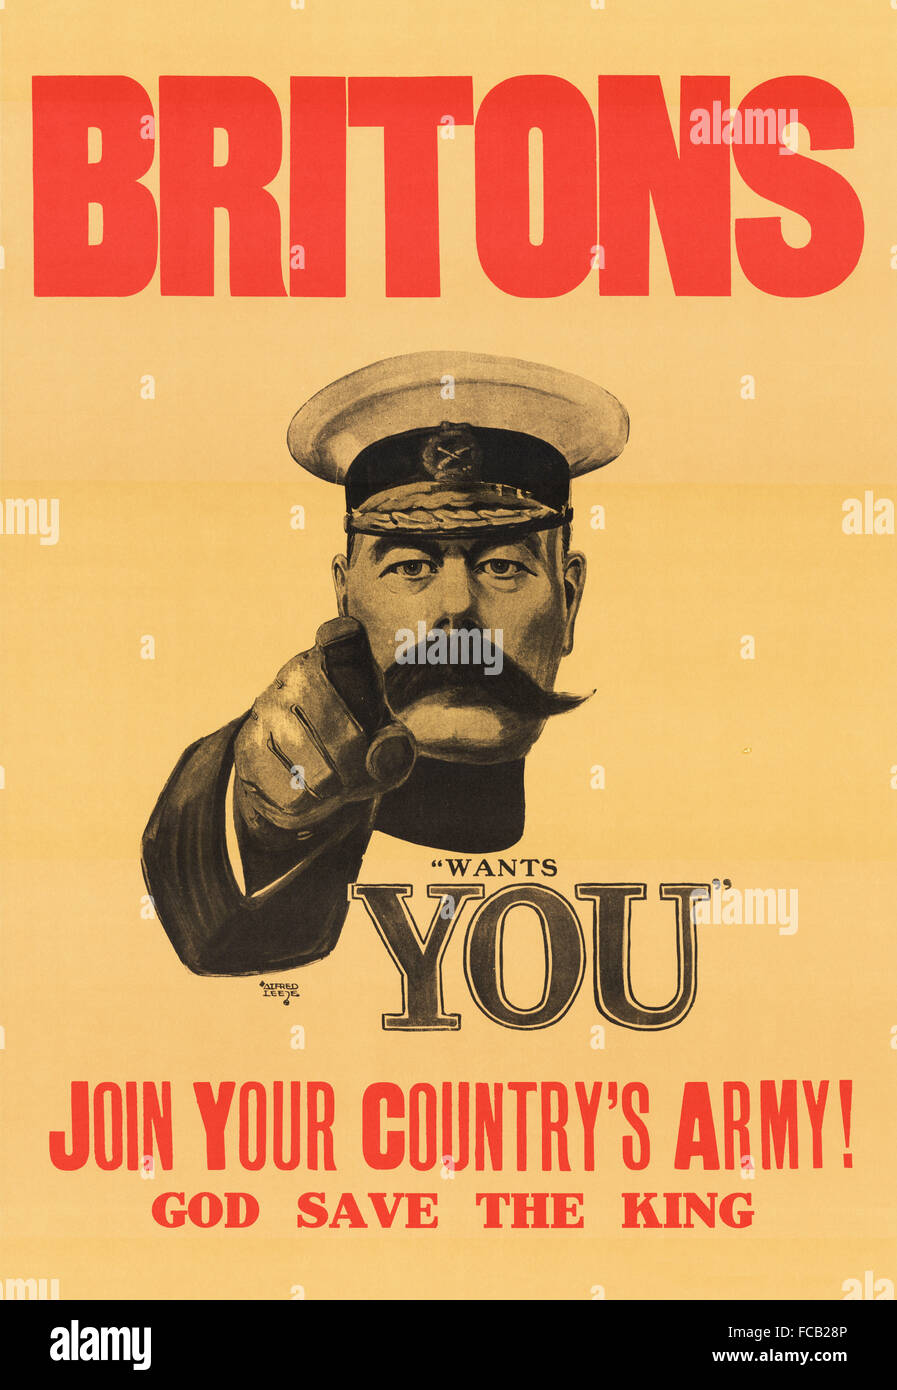 "Lord Kitchener Wants You" recruitment poster for the British army in WWI. It was originally designed as a front cover for the mass market magazine  "London Opinion", in a 1914 issue, and may never actually have been used  widely as a poster during the war. Stock Photo